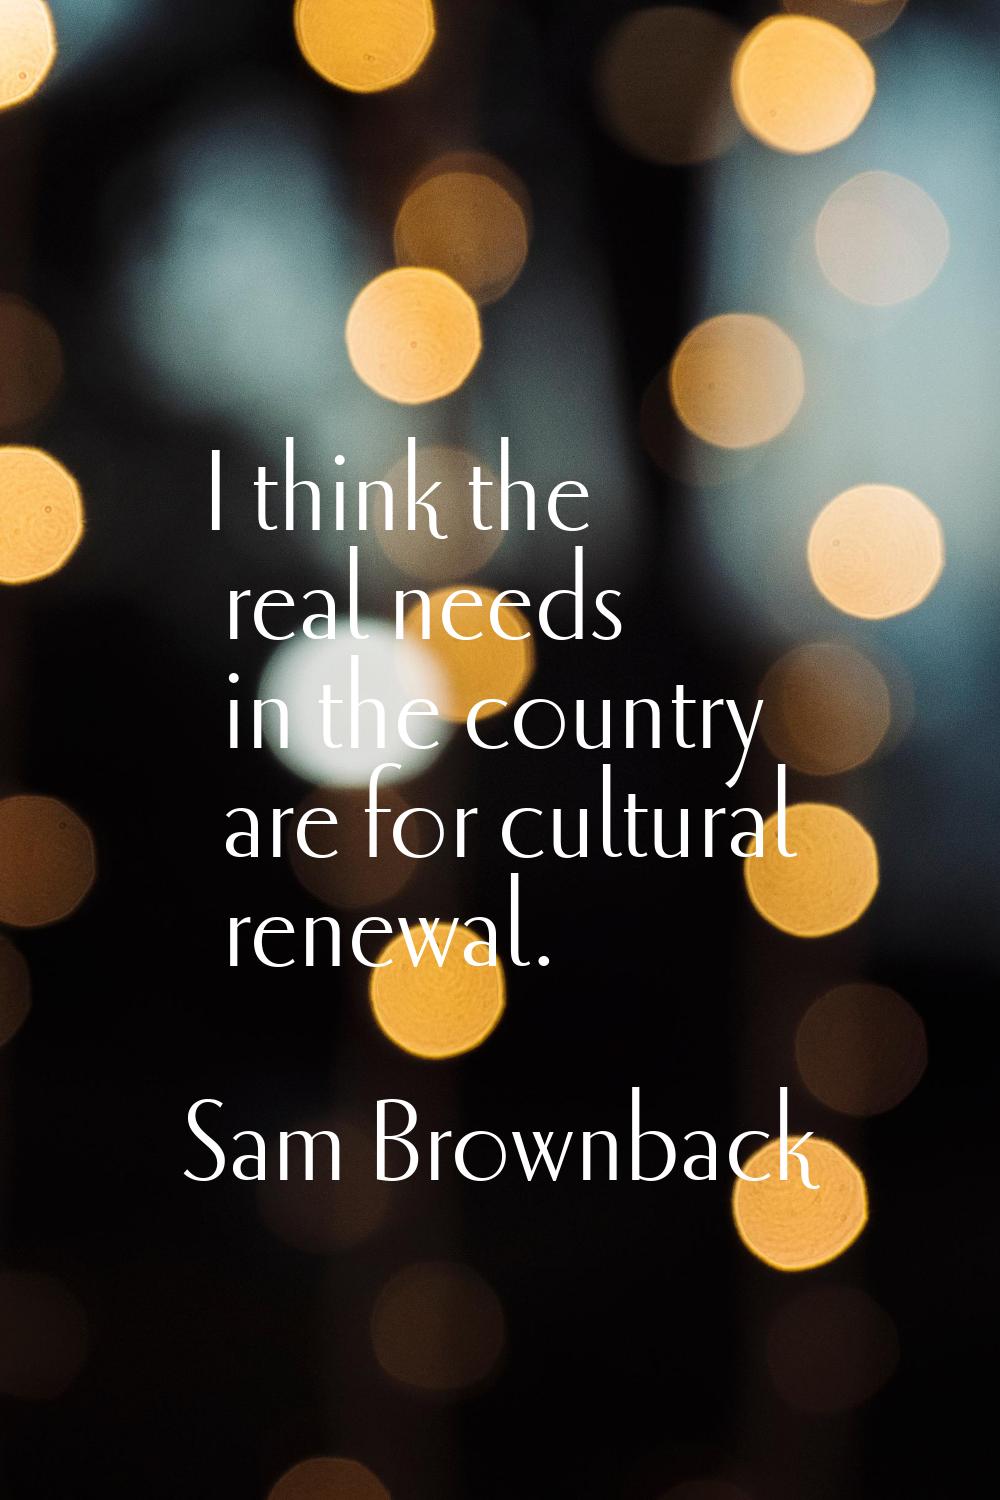 I think the real needs in the country are for cultural renewal.